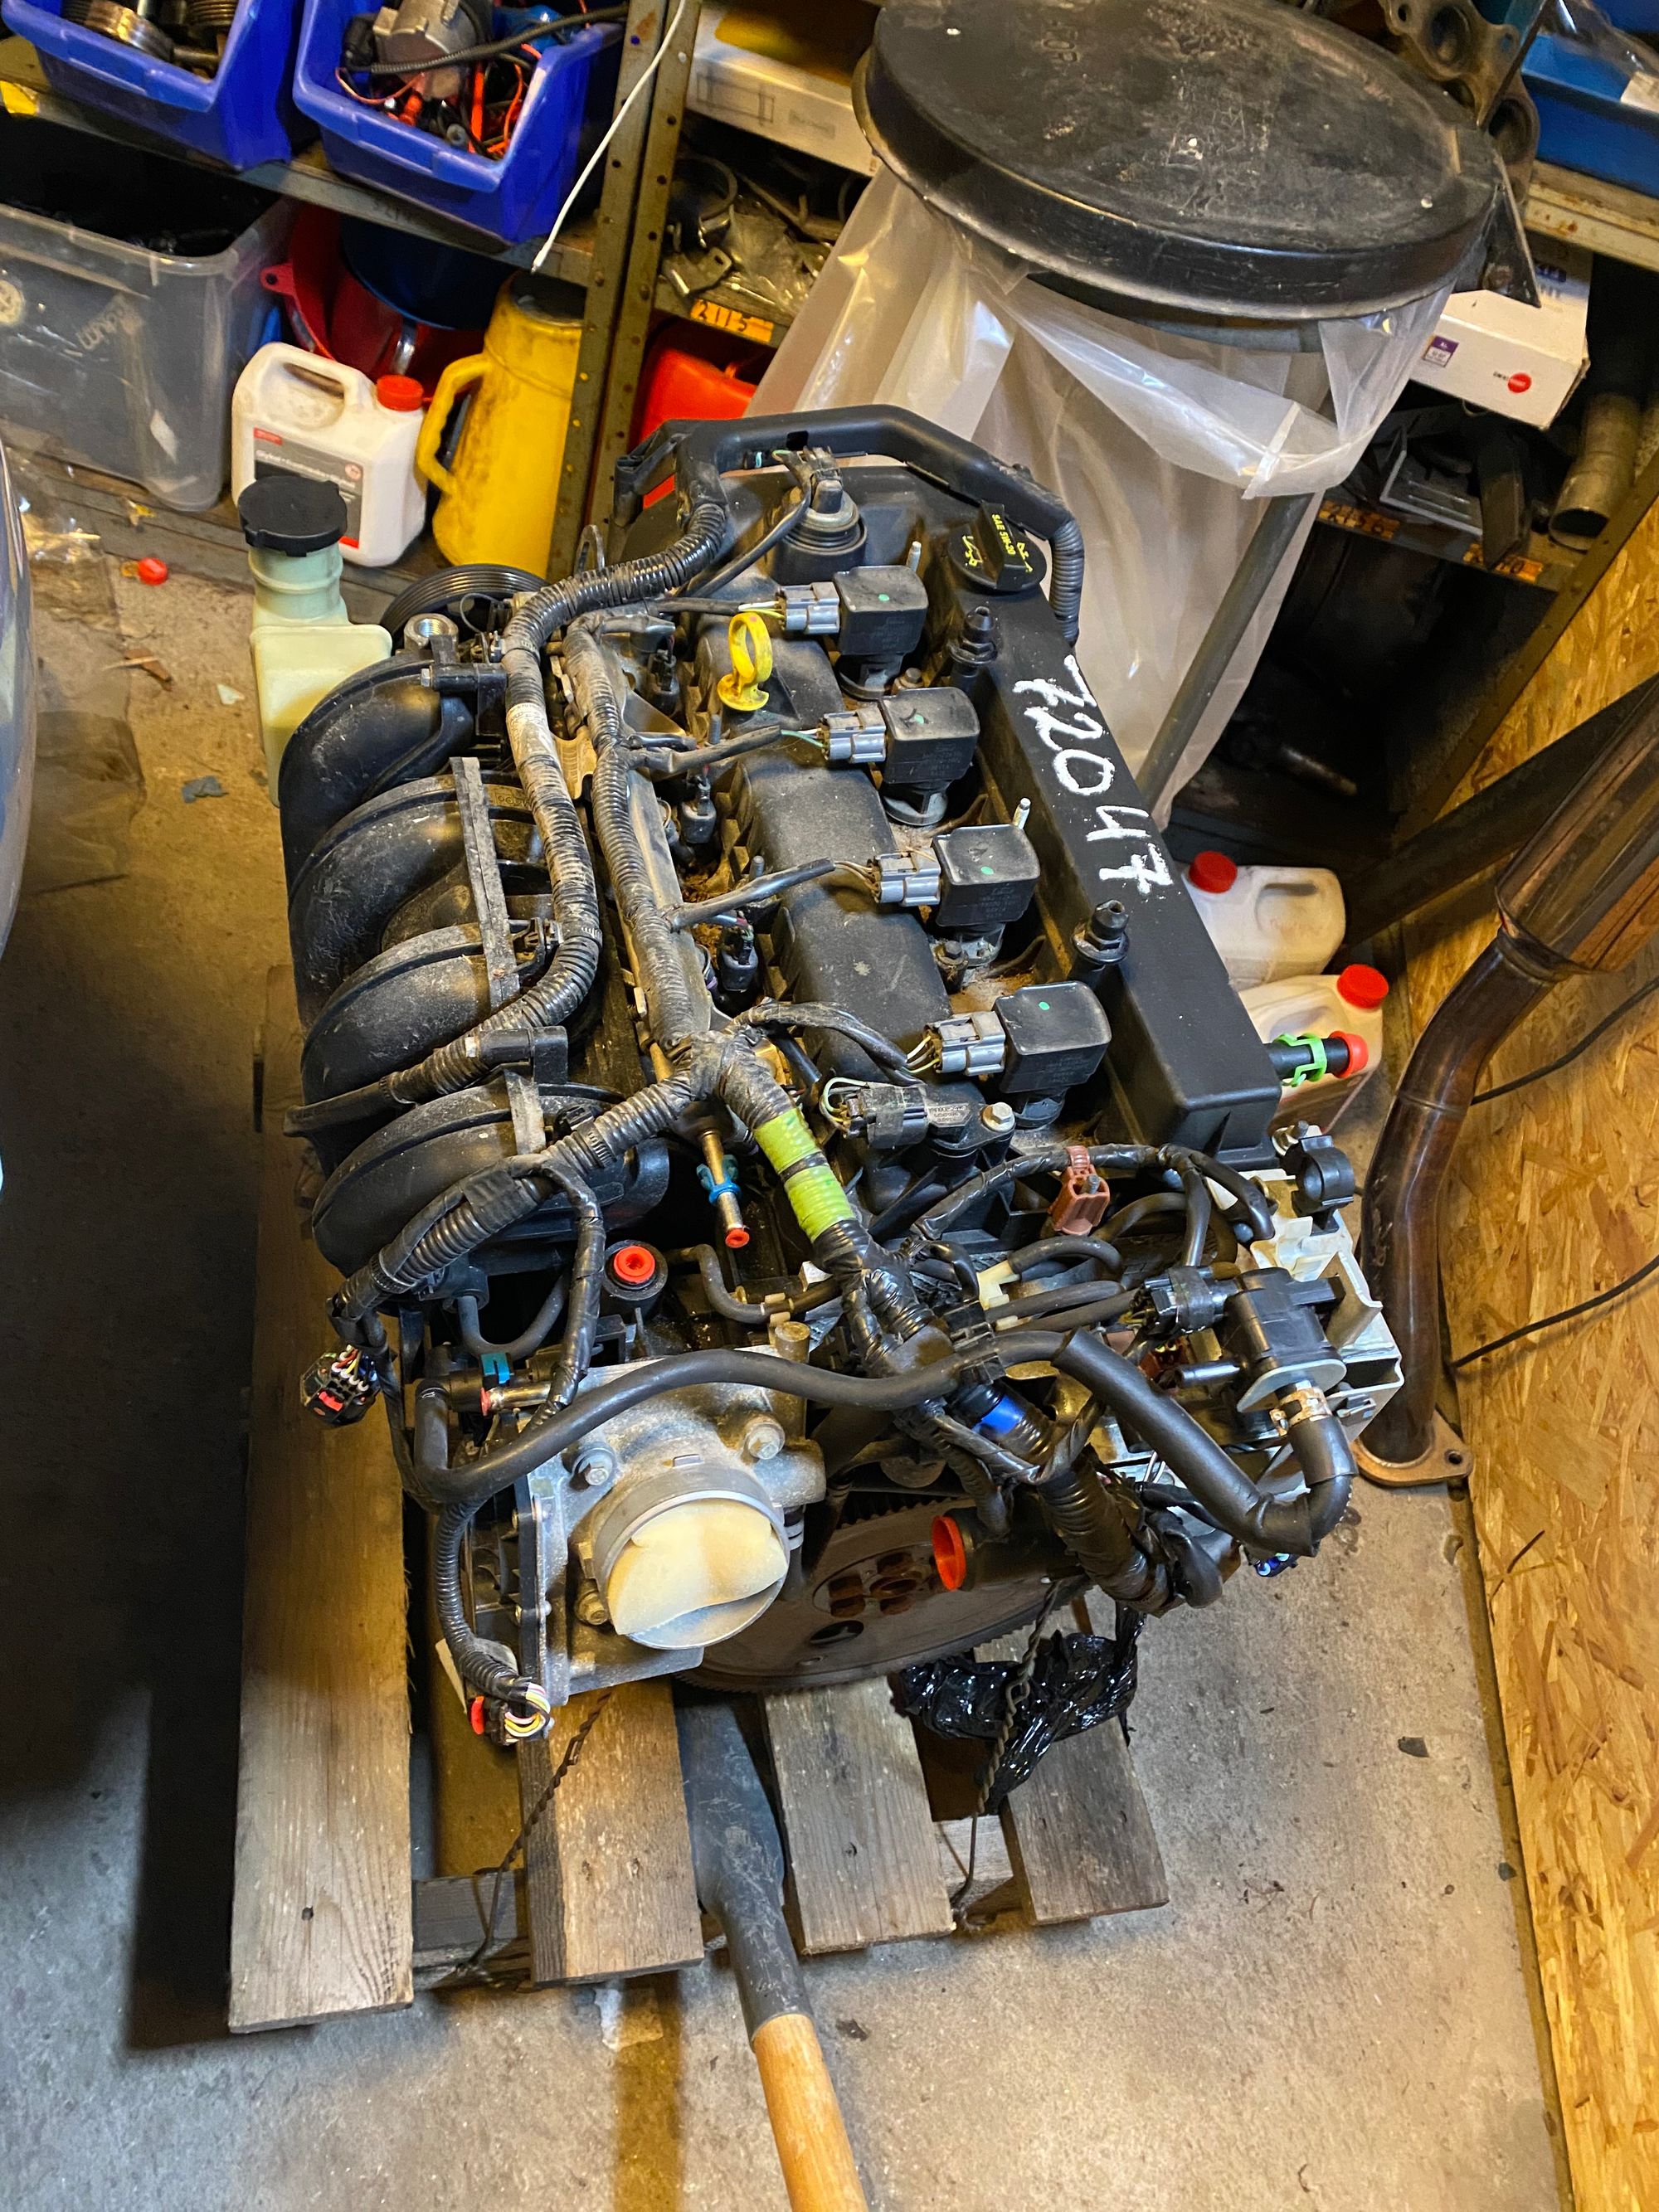 New engine for 2021 - back to the big block MZR.